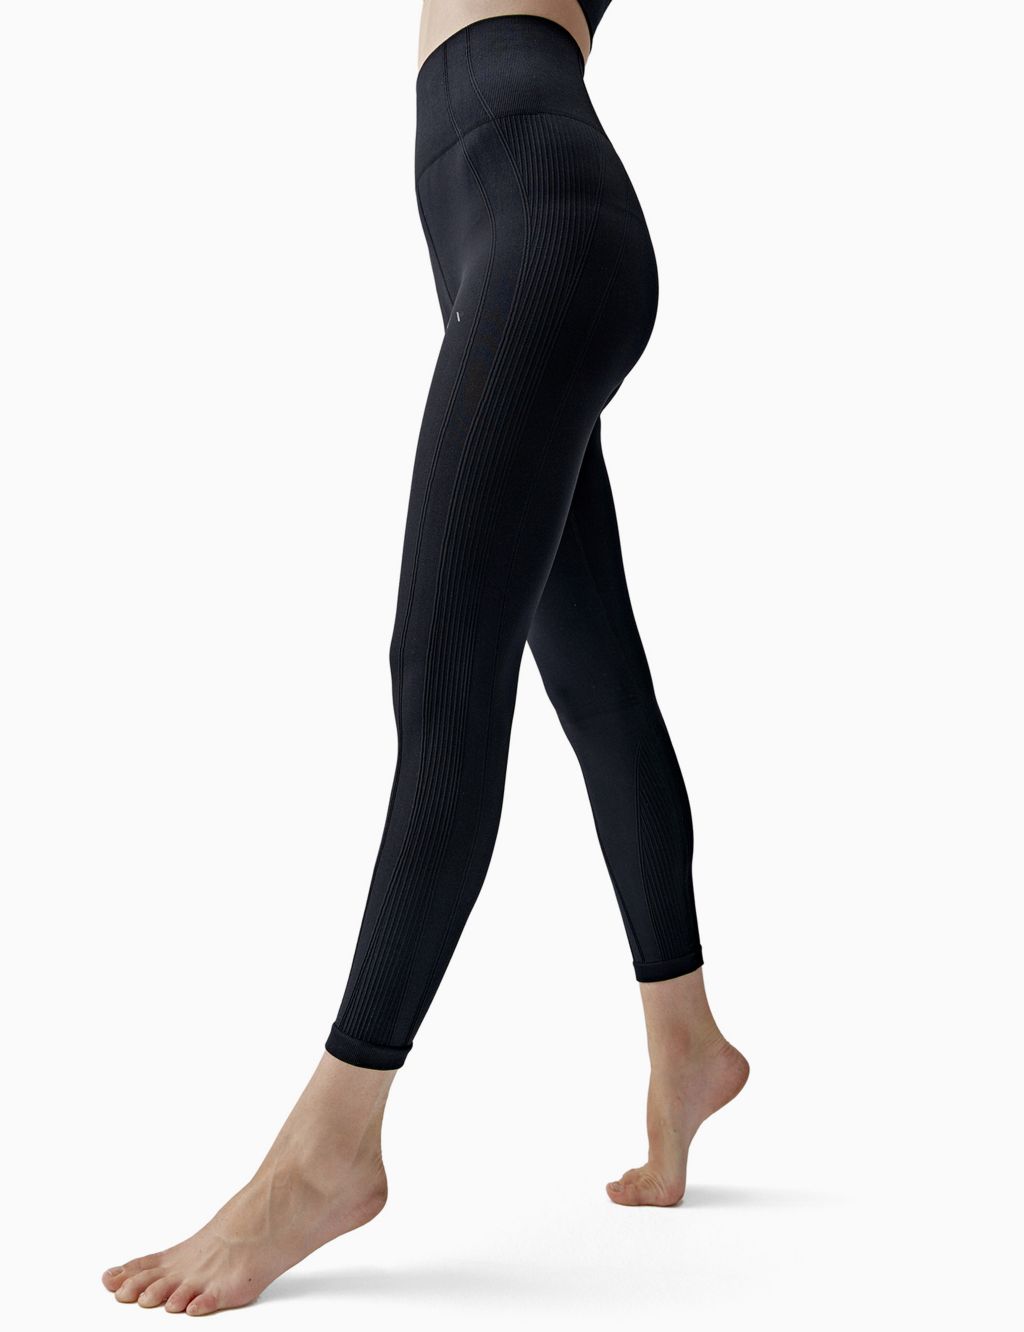 M&S shoppers rave about 'flattering' high wasted leggings that are perfect  for Christmas - OK! Magazine